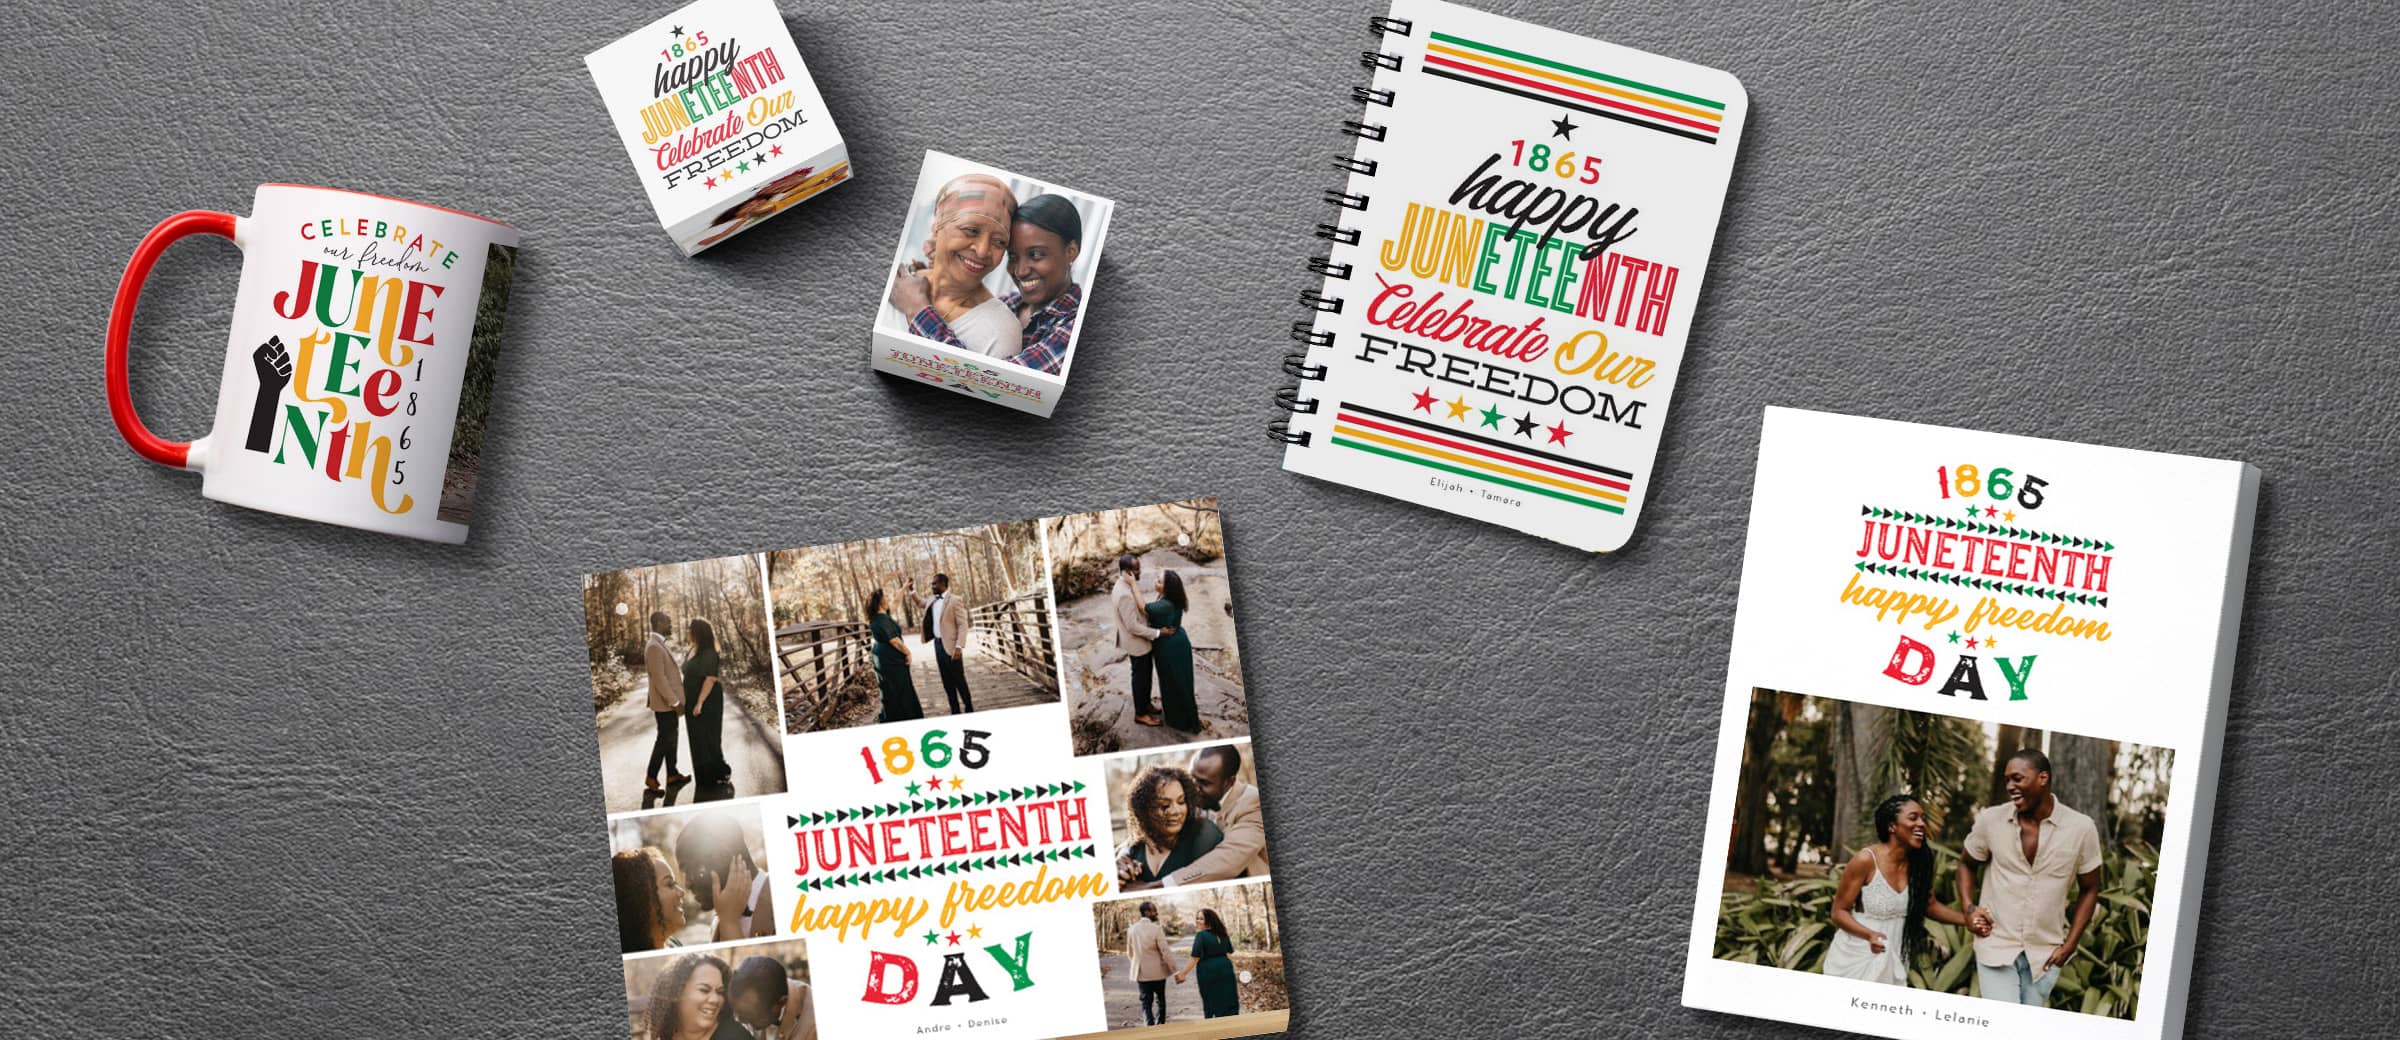 Juneteenth themed cards, mugs, magnets and other products